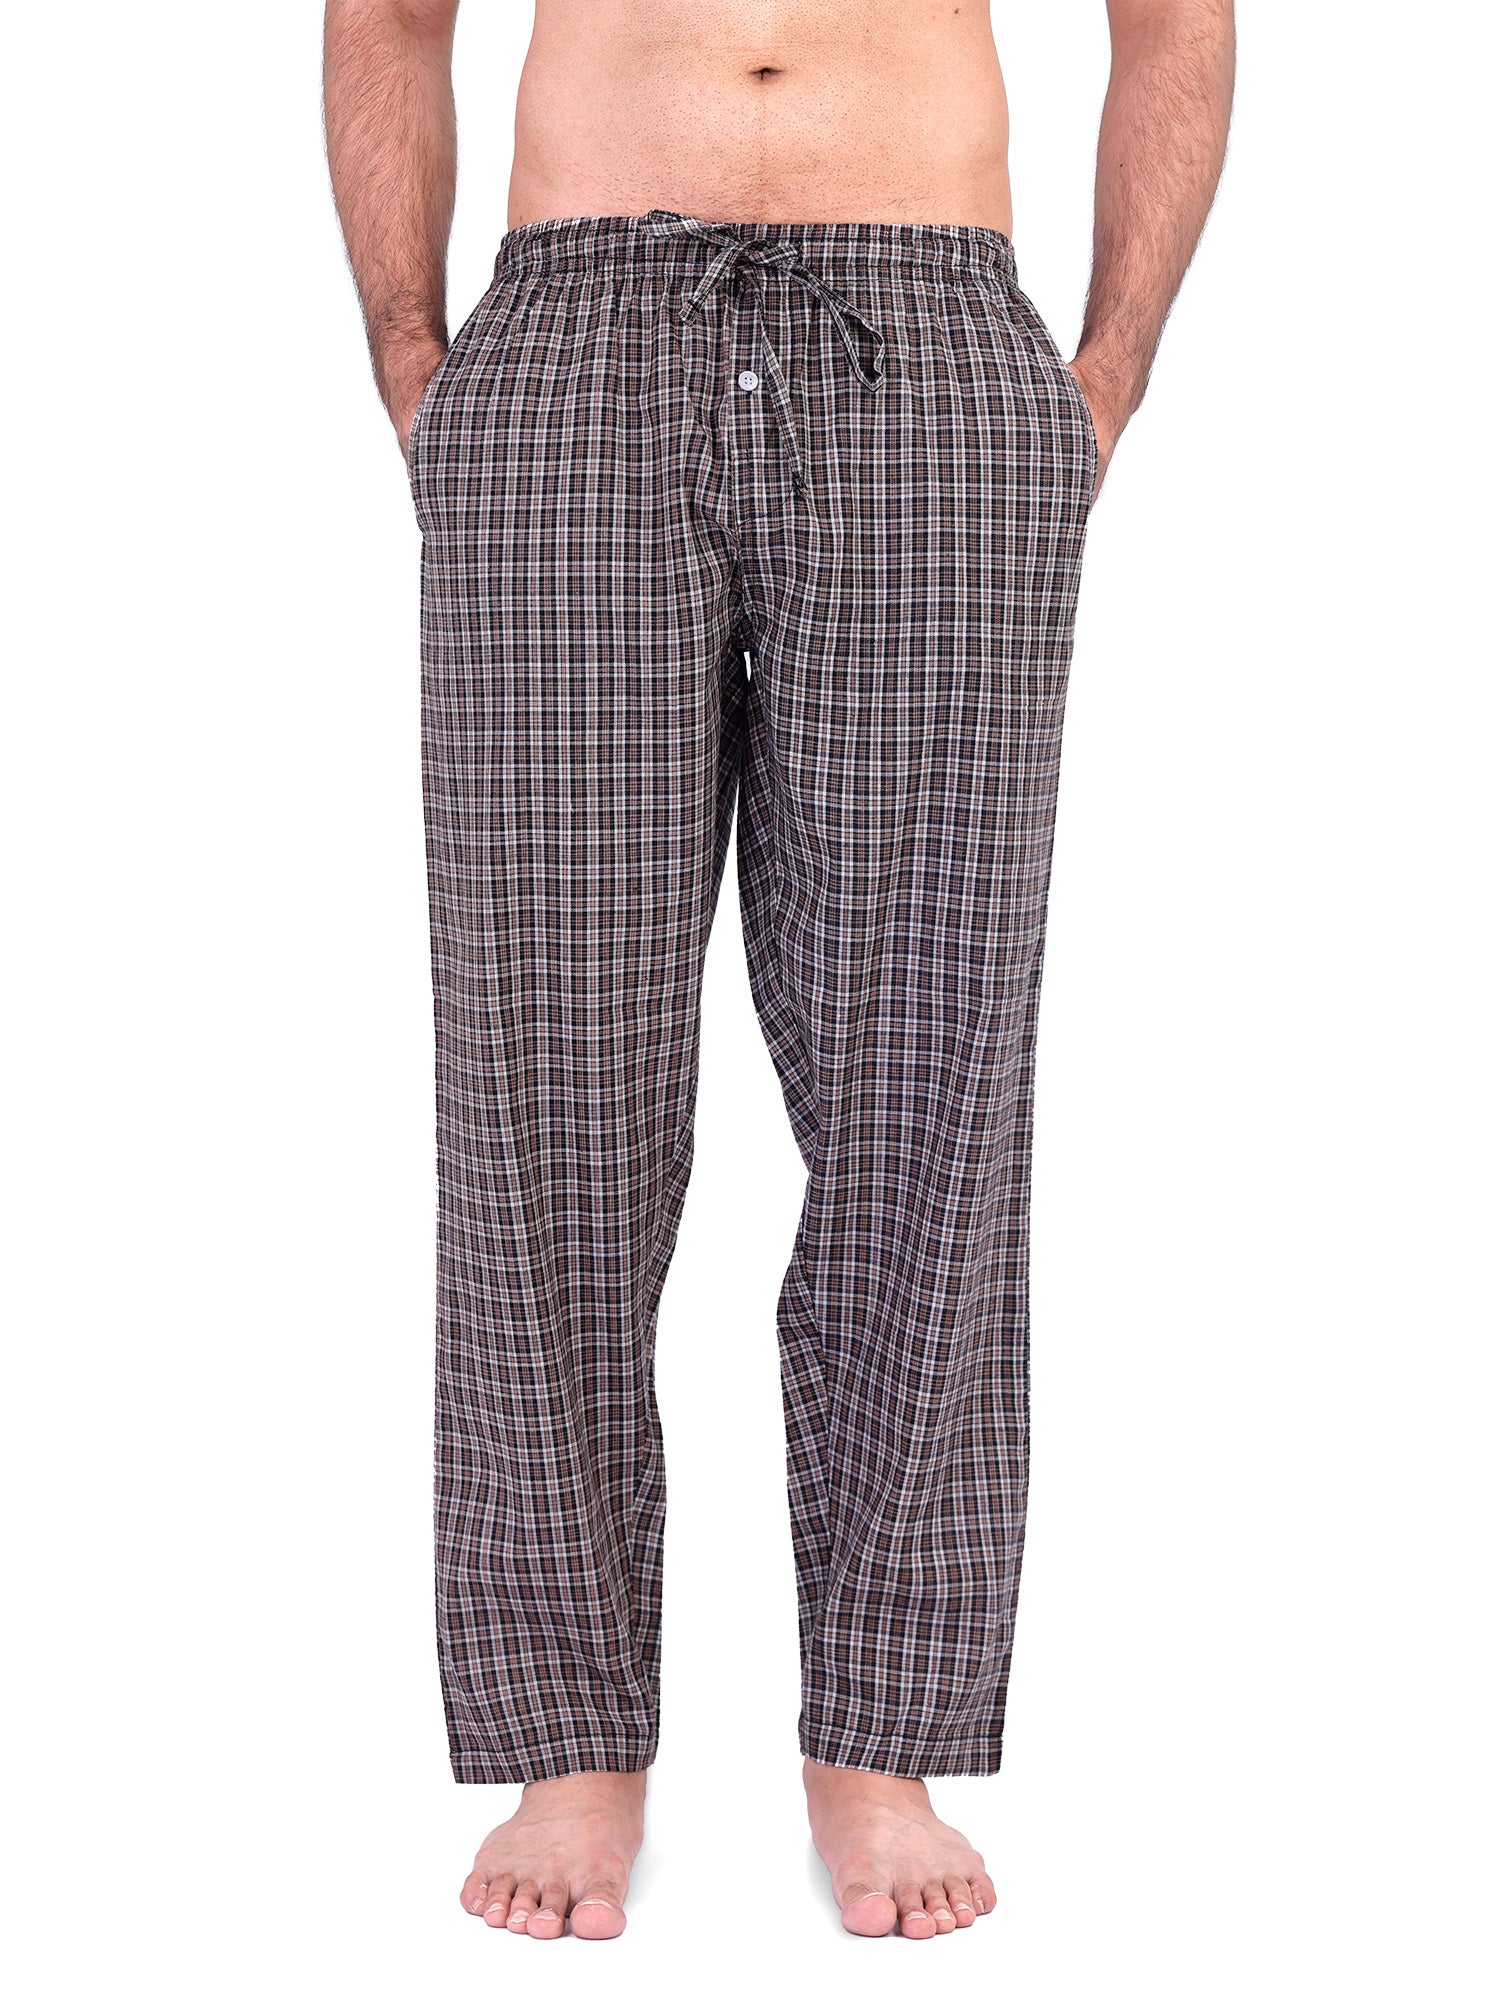 Coyuchi Women's Certified Organic Crinkled Cotton Pajama Pant | Clothing  and Accessories